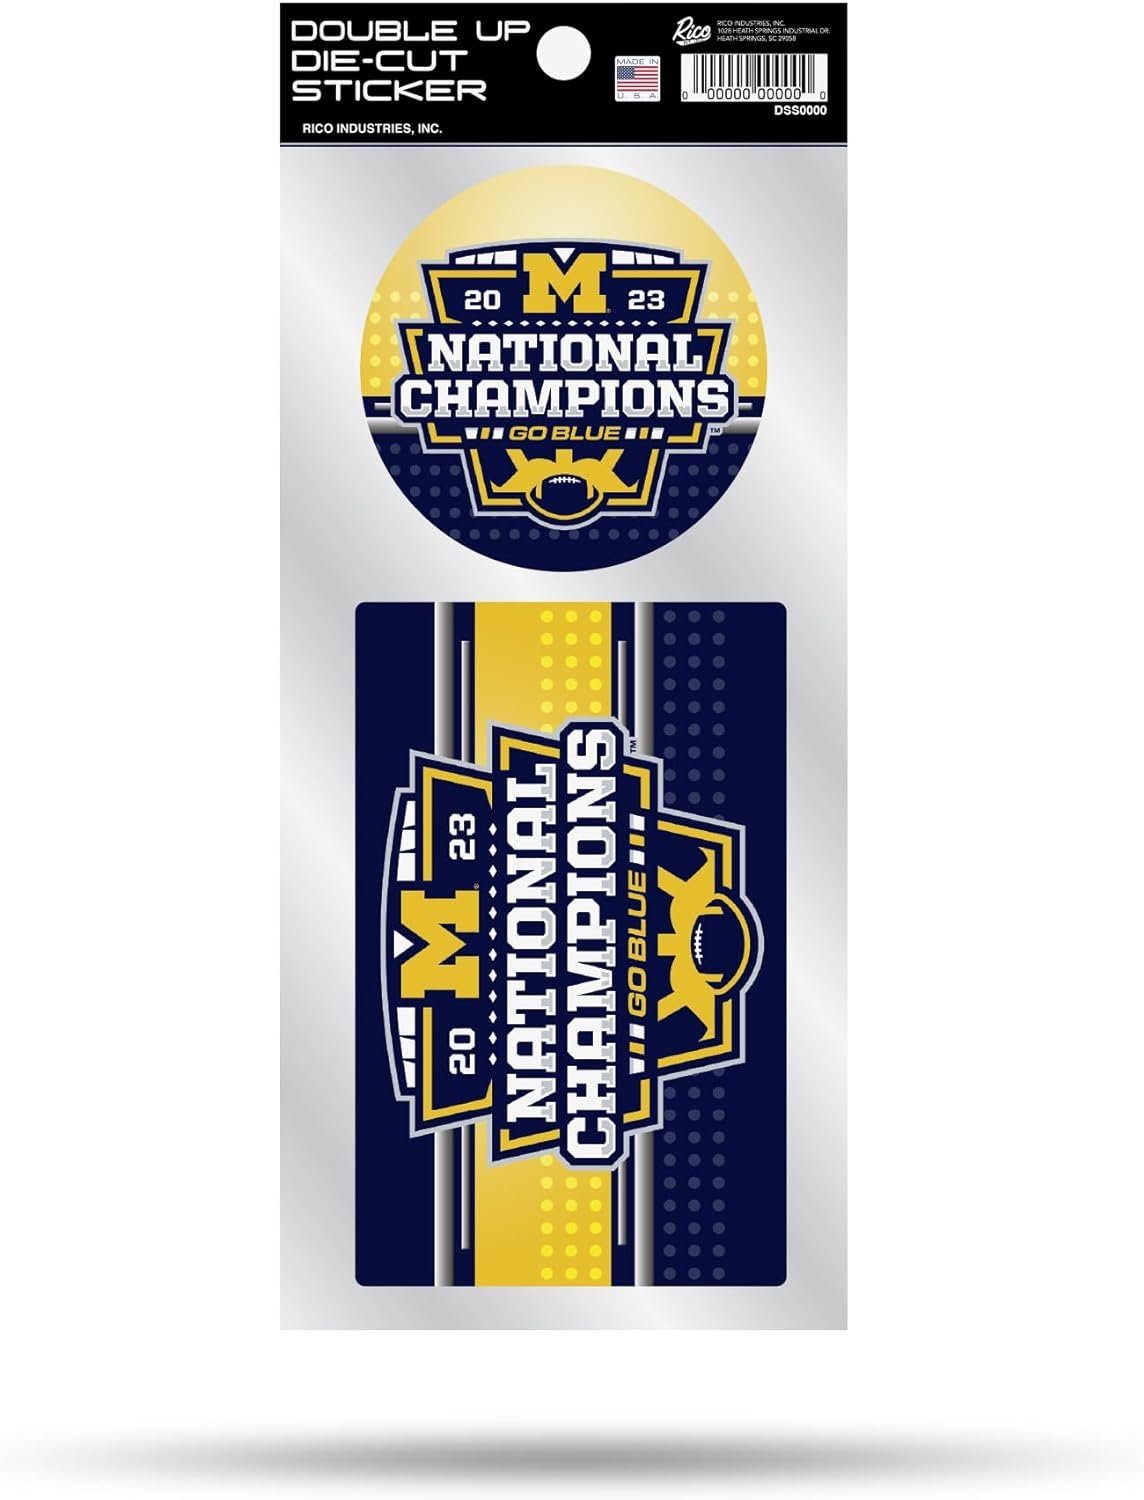 University of Michigan Wolverines 2024 Champions 4x9 Inch Double Up Decal Sticker Sheet, Flat Vinyl, Full Adhesive Backing, Great for Auto or Home